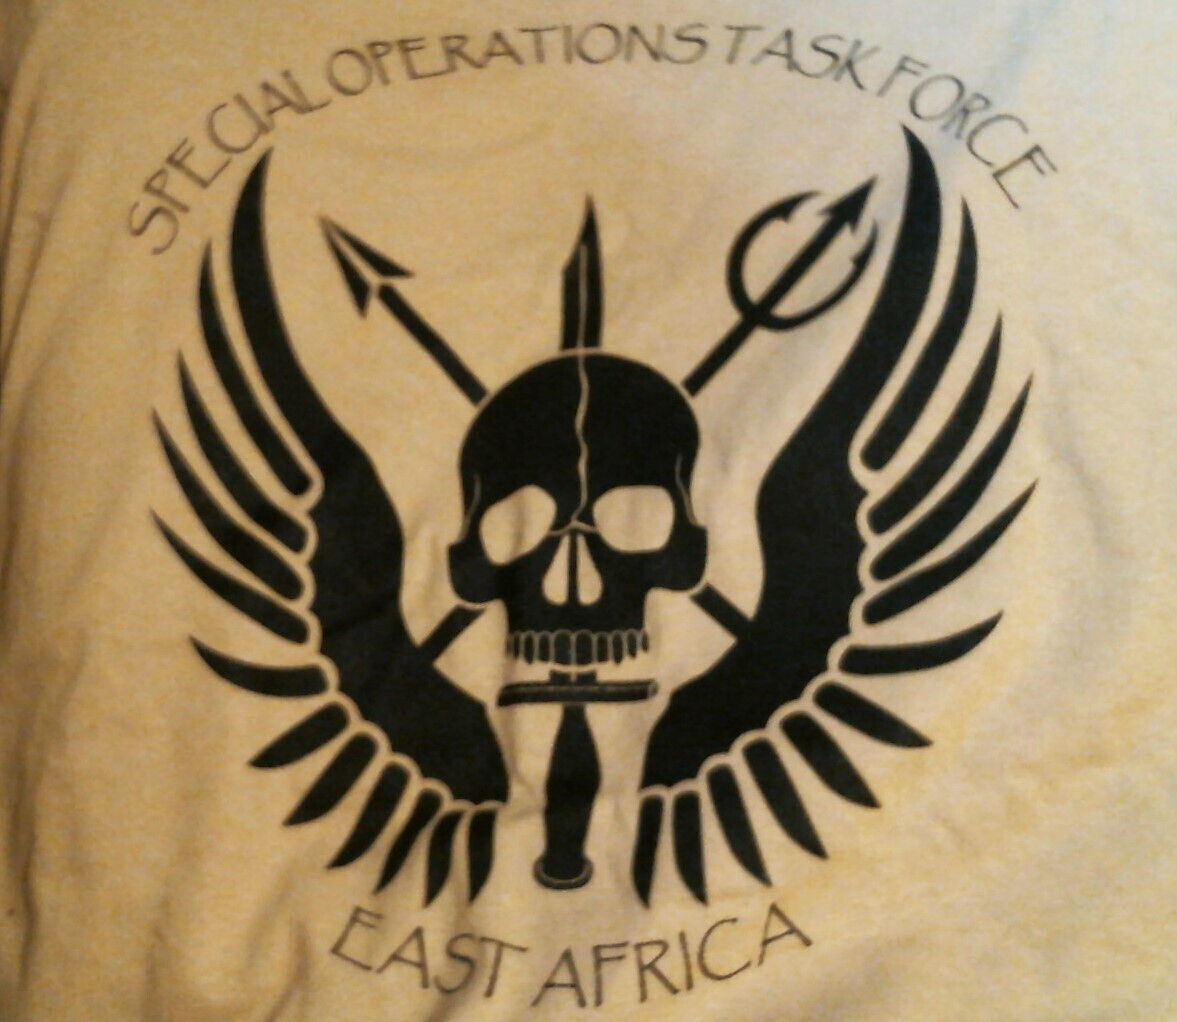 US Navy SEALS Special Operations Task Force East Africa T-Shirt Excellent To New